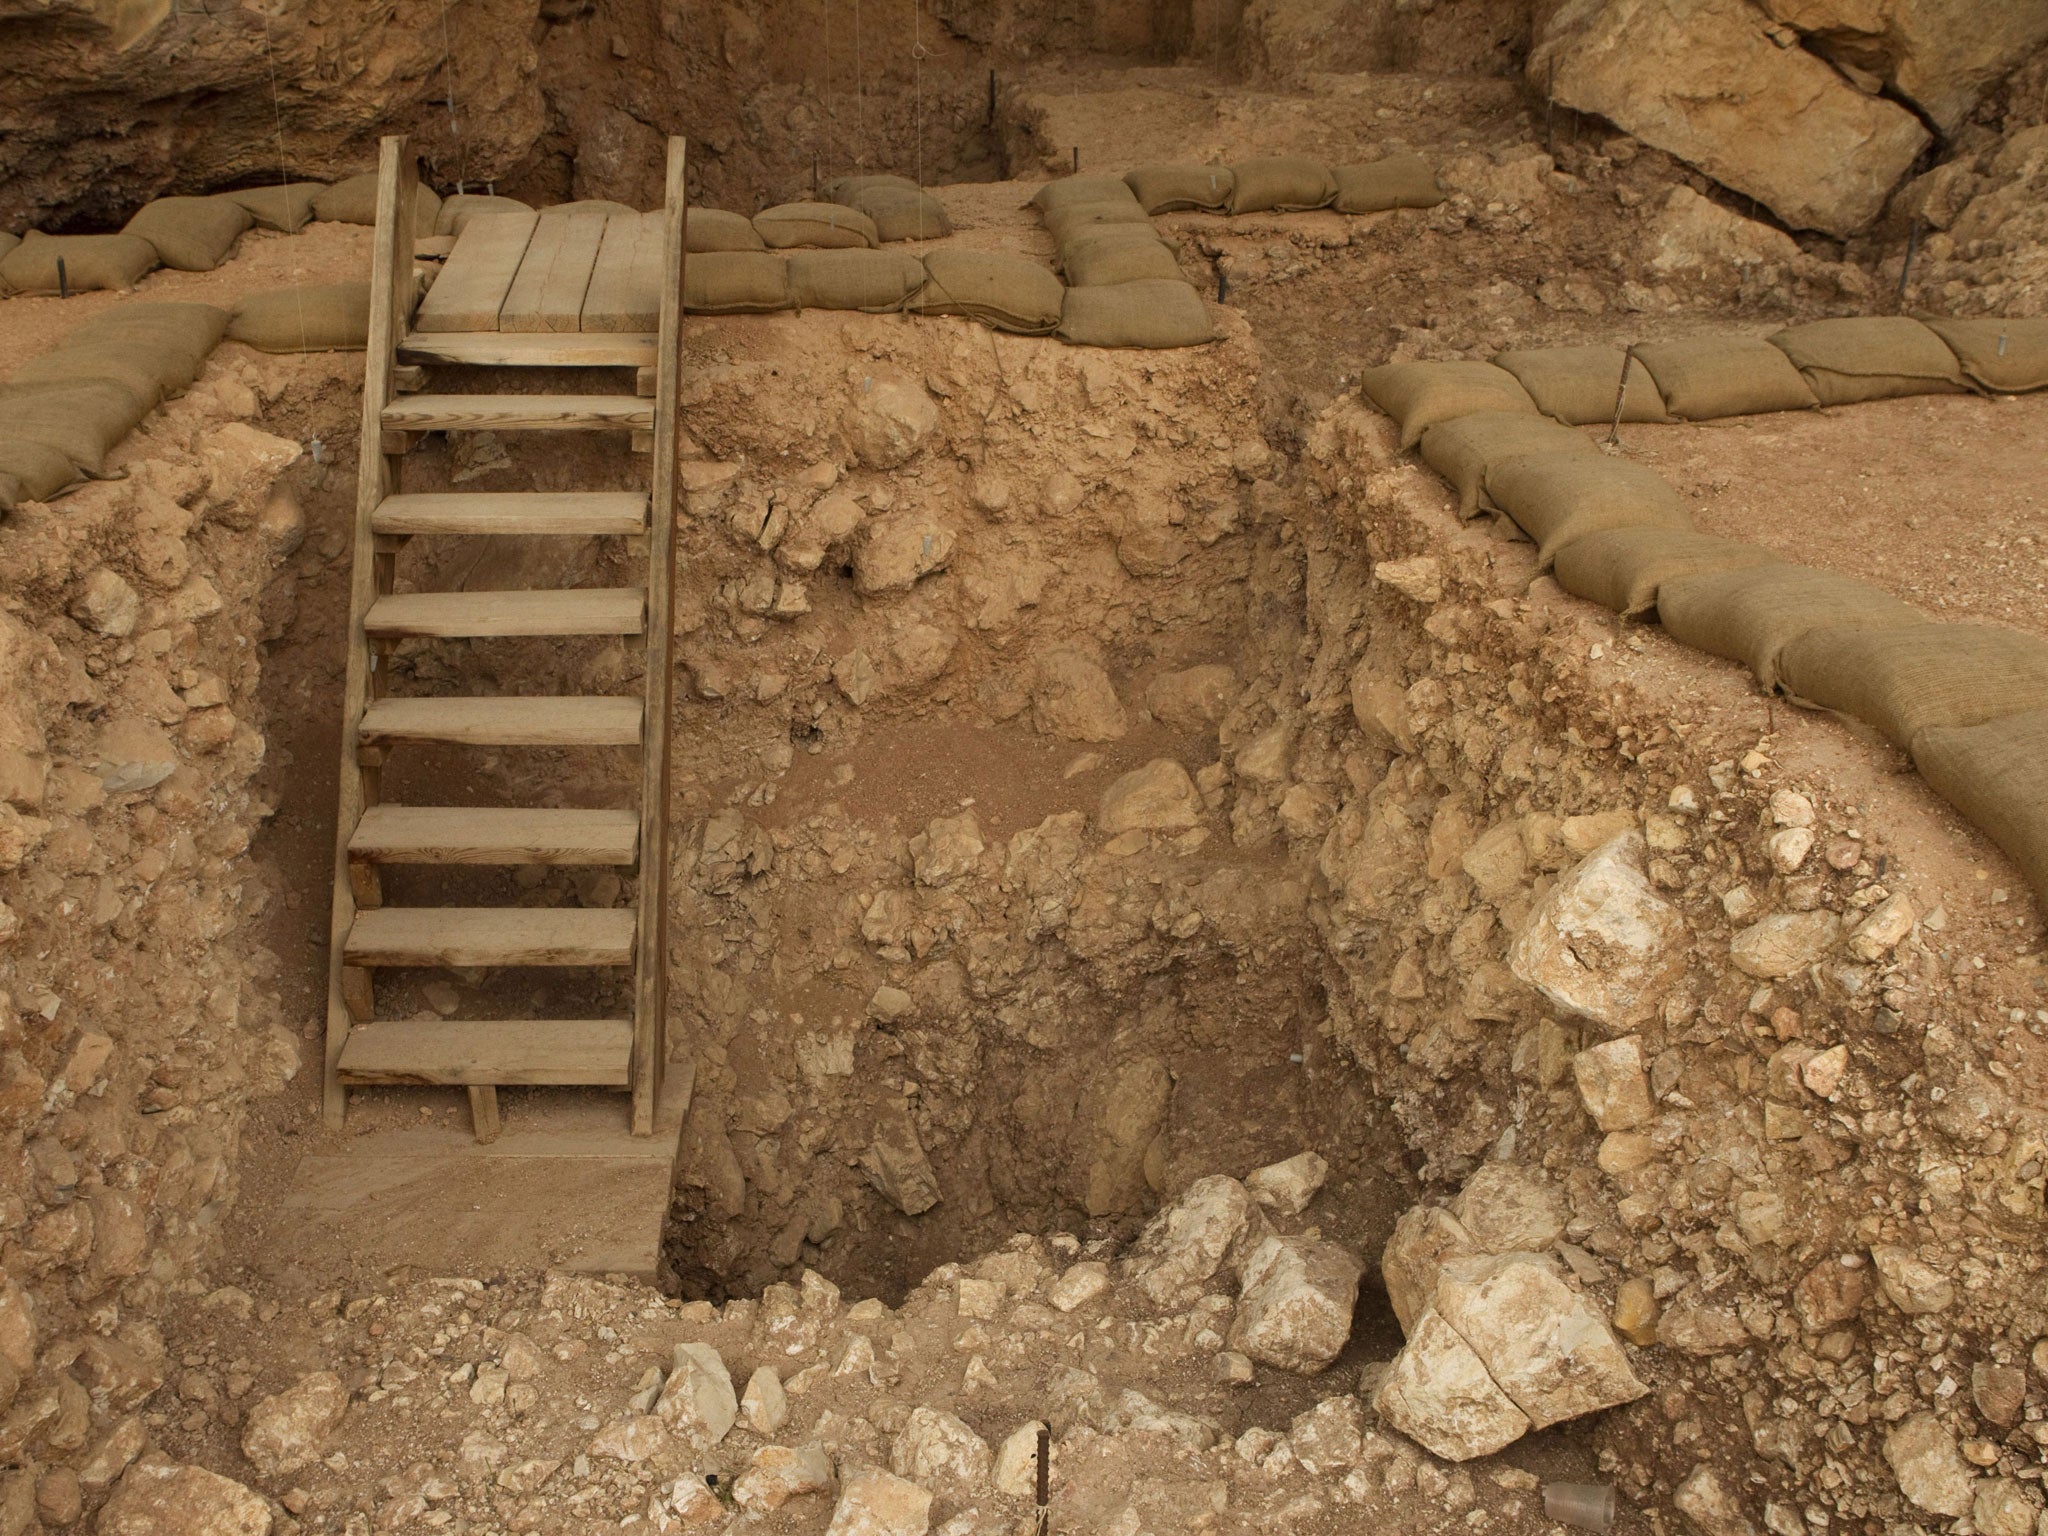 A picture shows the Qesem Cave excavation site where the campfire was discovered.